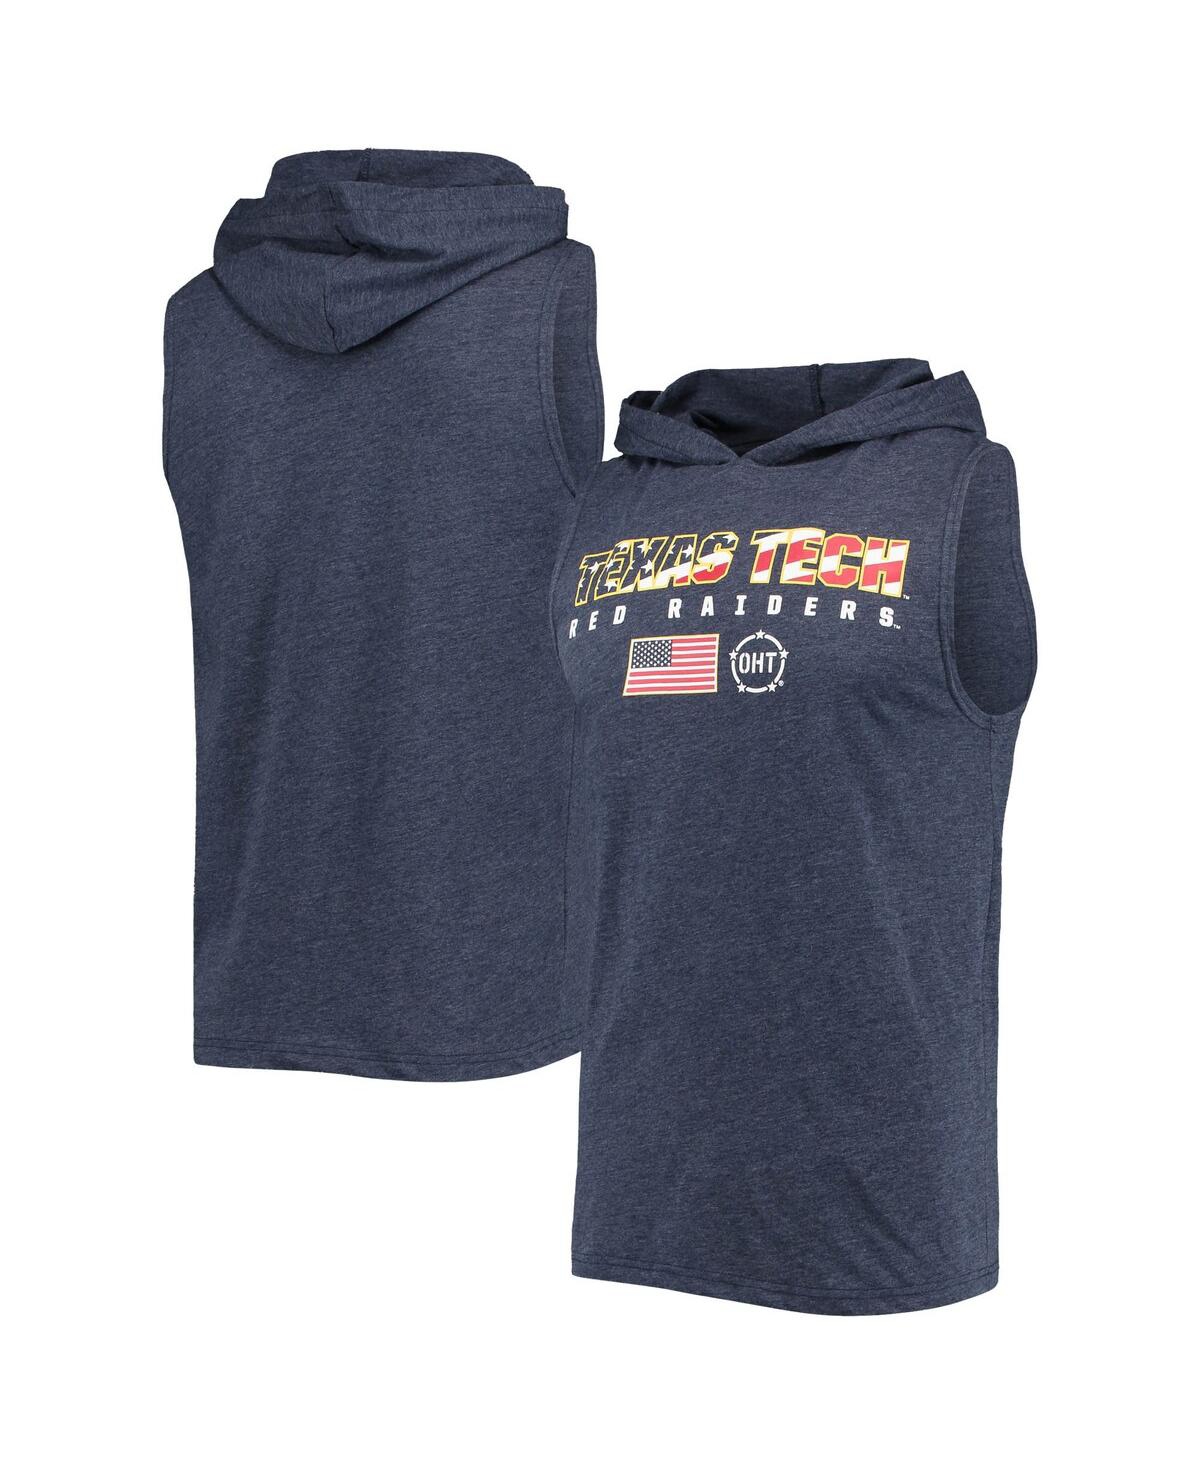 Colosseum Men's  Navy Wisconsin Badgers Oht Military-inspired Appreciation Americana Hoodie Sleeveles In Heathered Navy